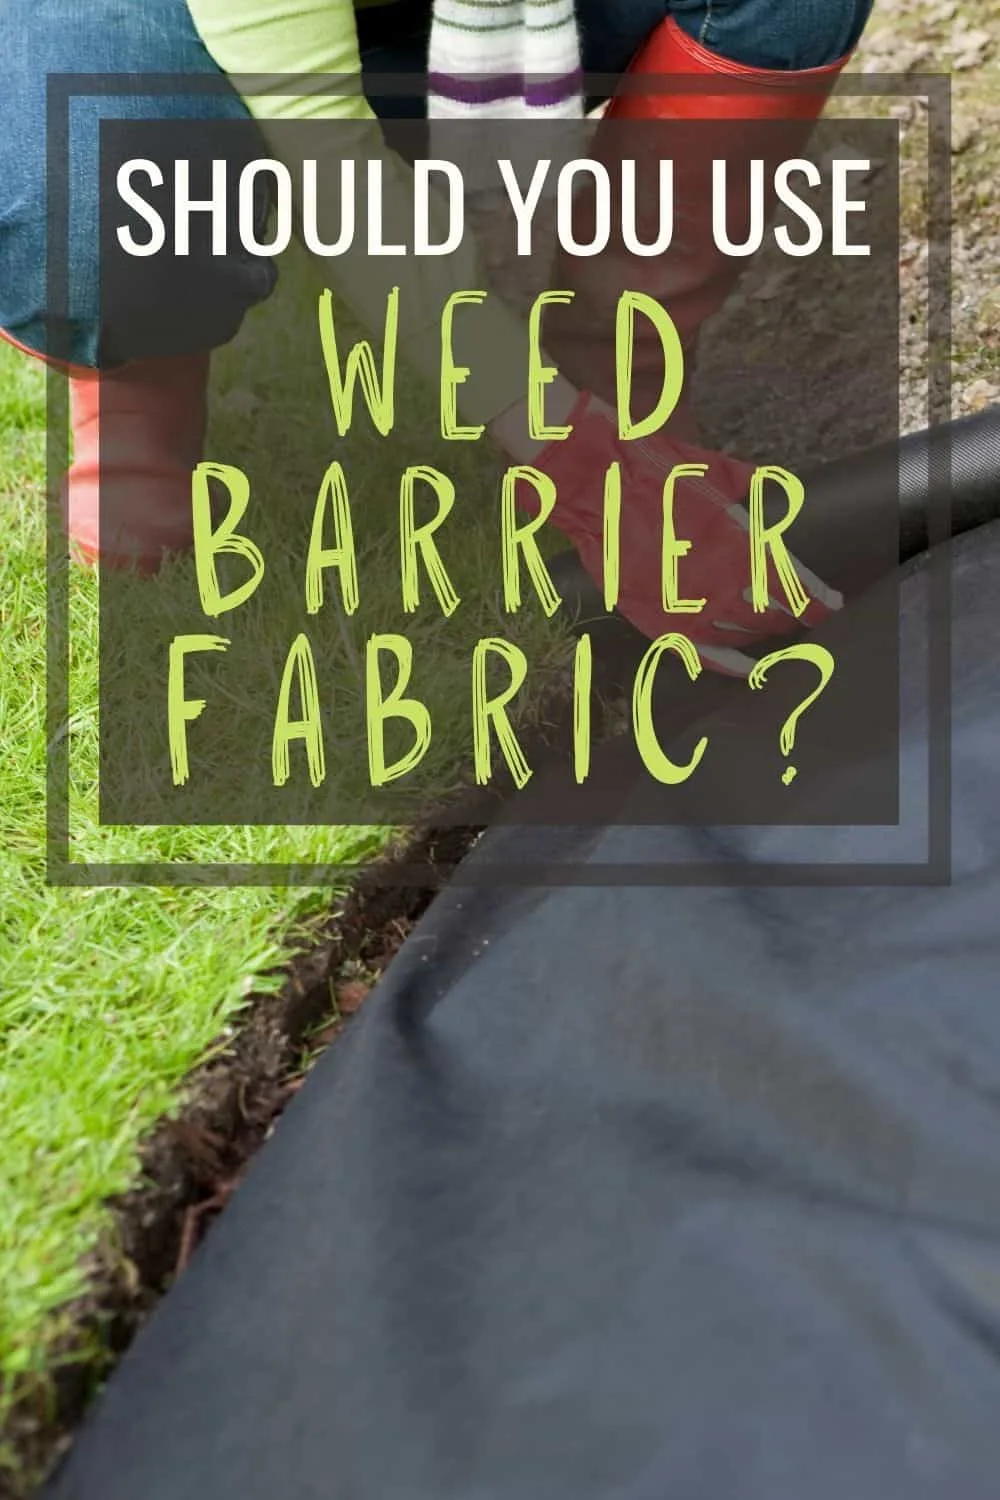 Should you use weed barrier fabric?